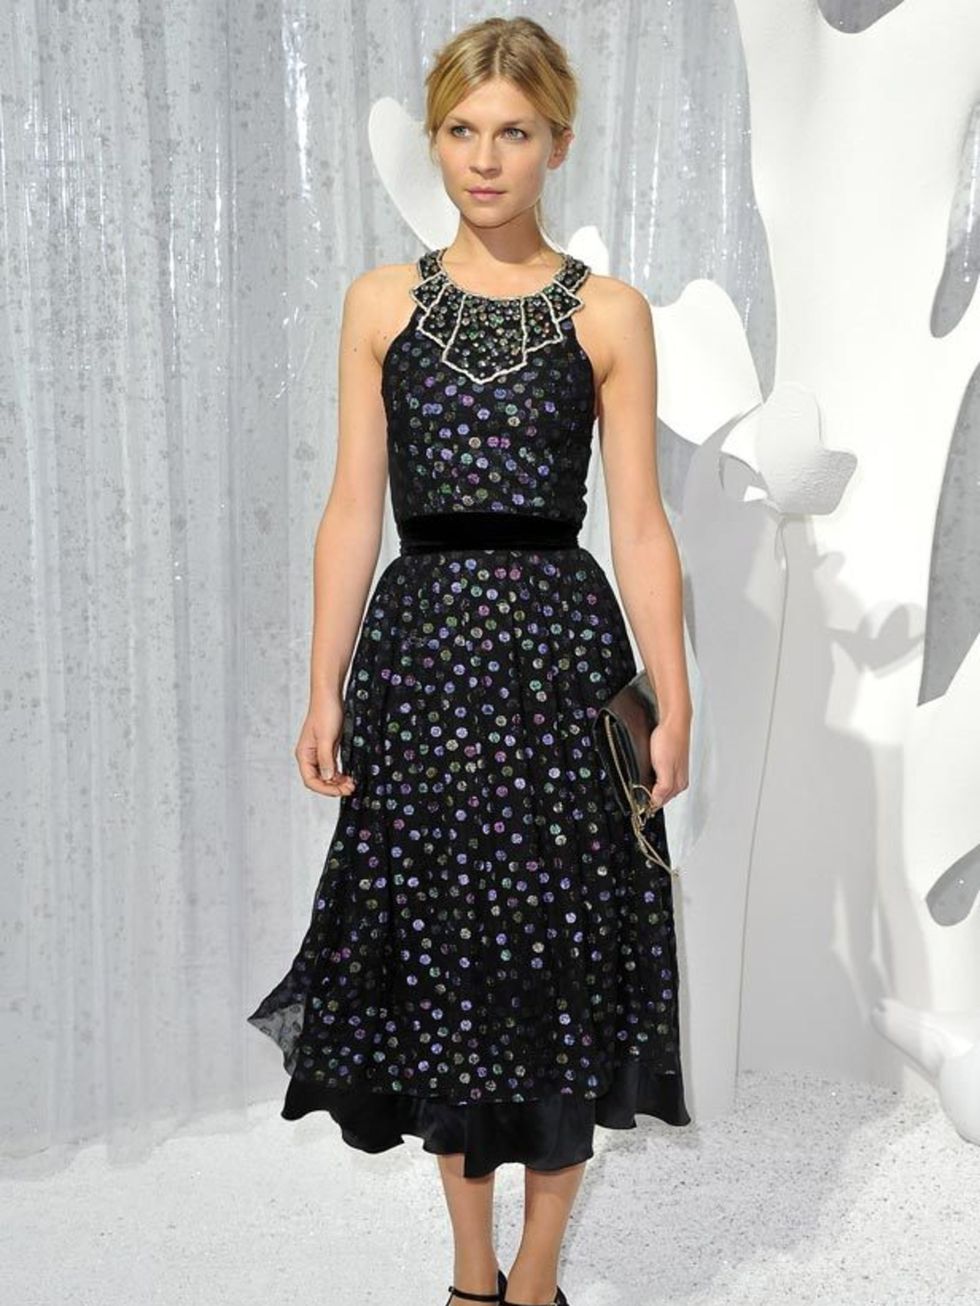 <p>Clemence Poesy wears this <a href="http://www.elleuk.com/catwalk/collections/chanel/">Chanel</a> polka-dot halter dress with bejewelled neckline, <a href="http://www.elleuk.com/catwalk/collections/miu-miu/">Miu Miu</a> shoes and metallic clutch for the